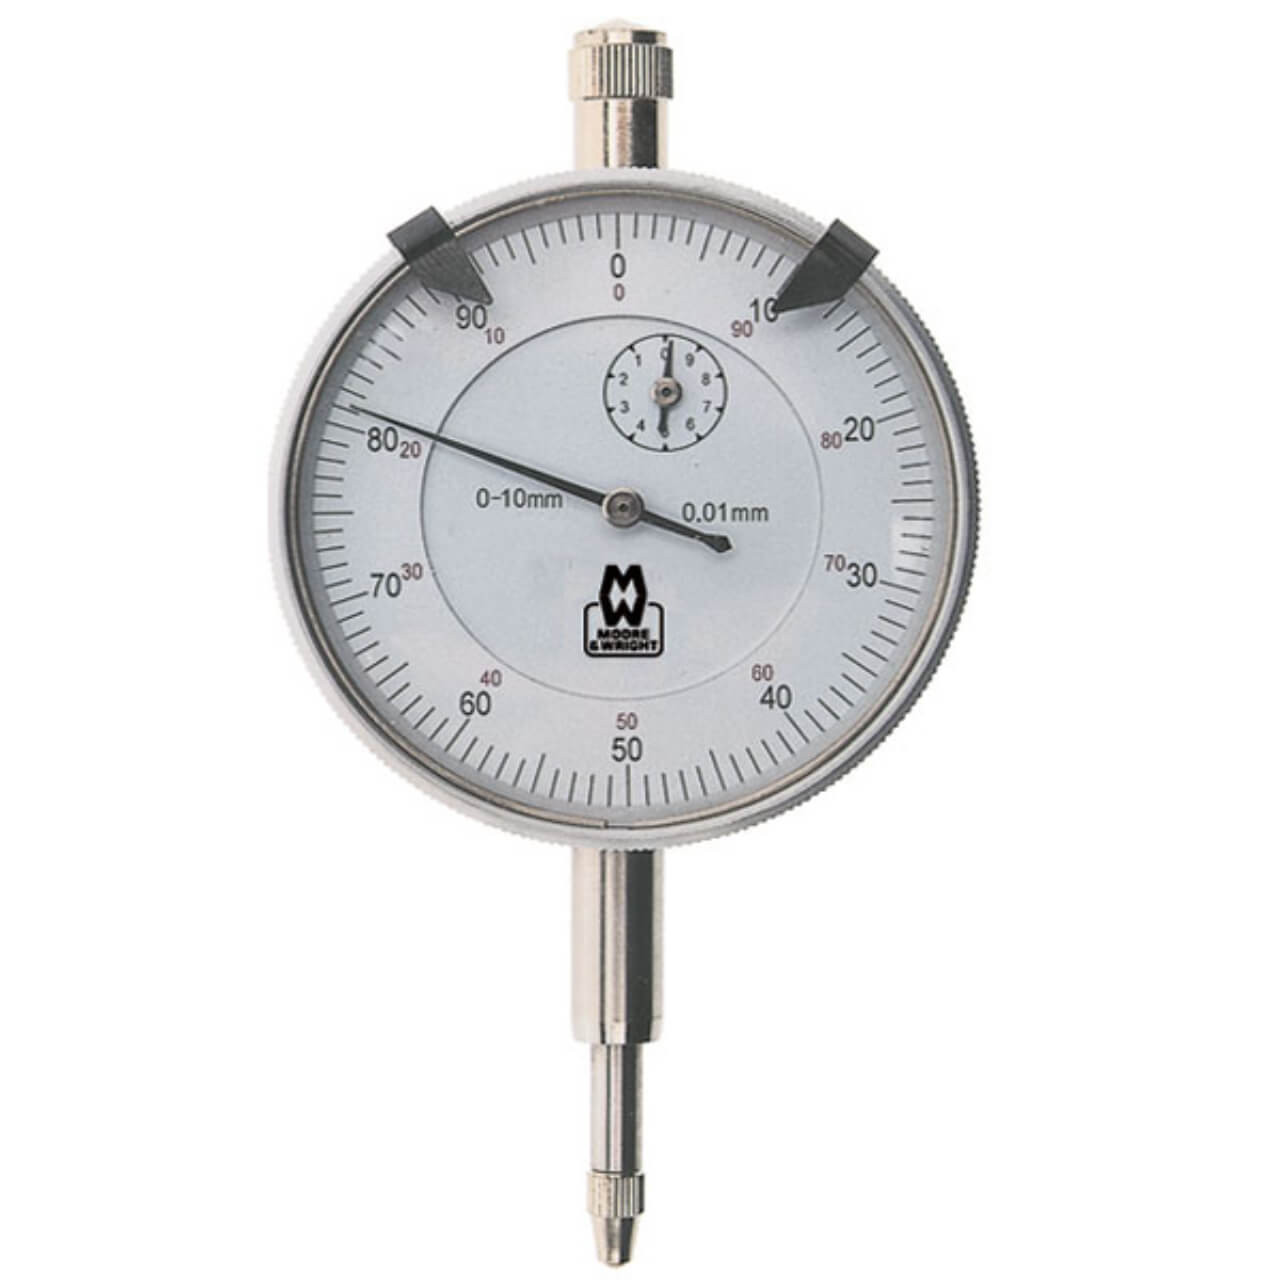 Moore & Wright Dial Indicator 0-10mm